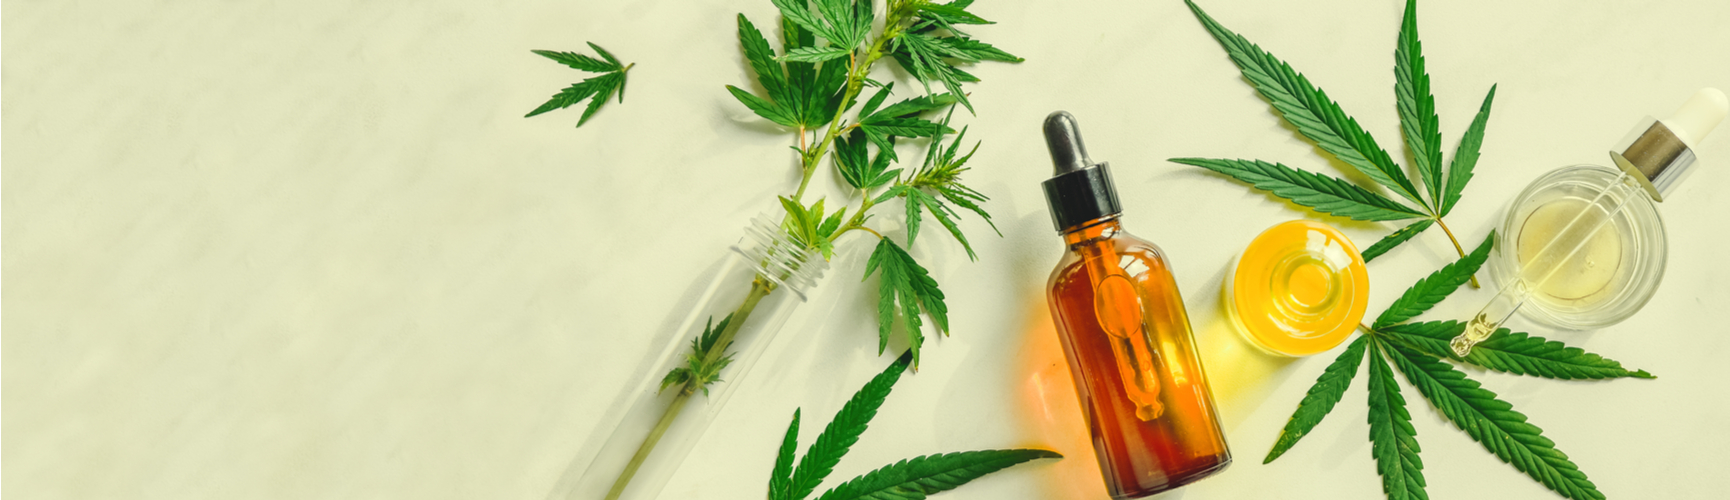 Best CBD Oil For Your Medical Needs